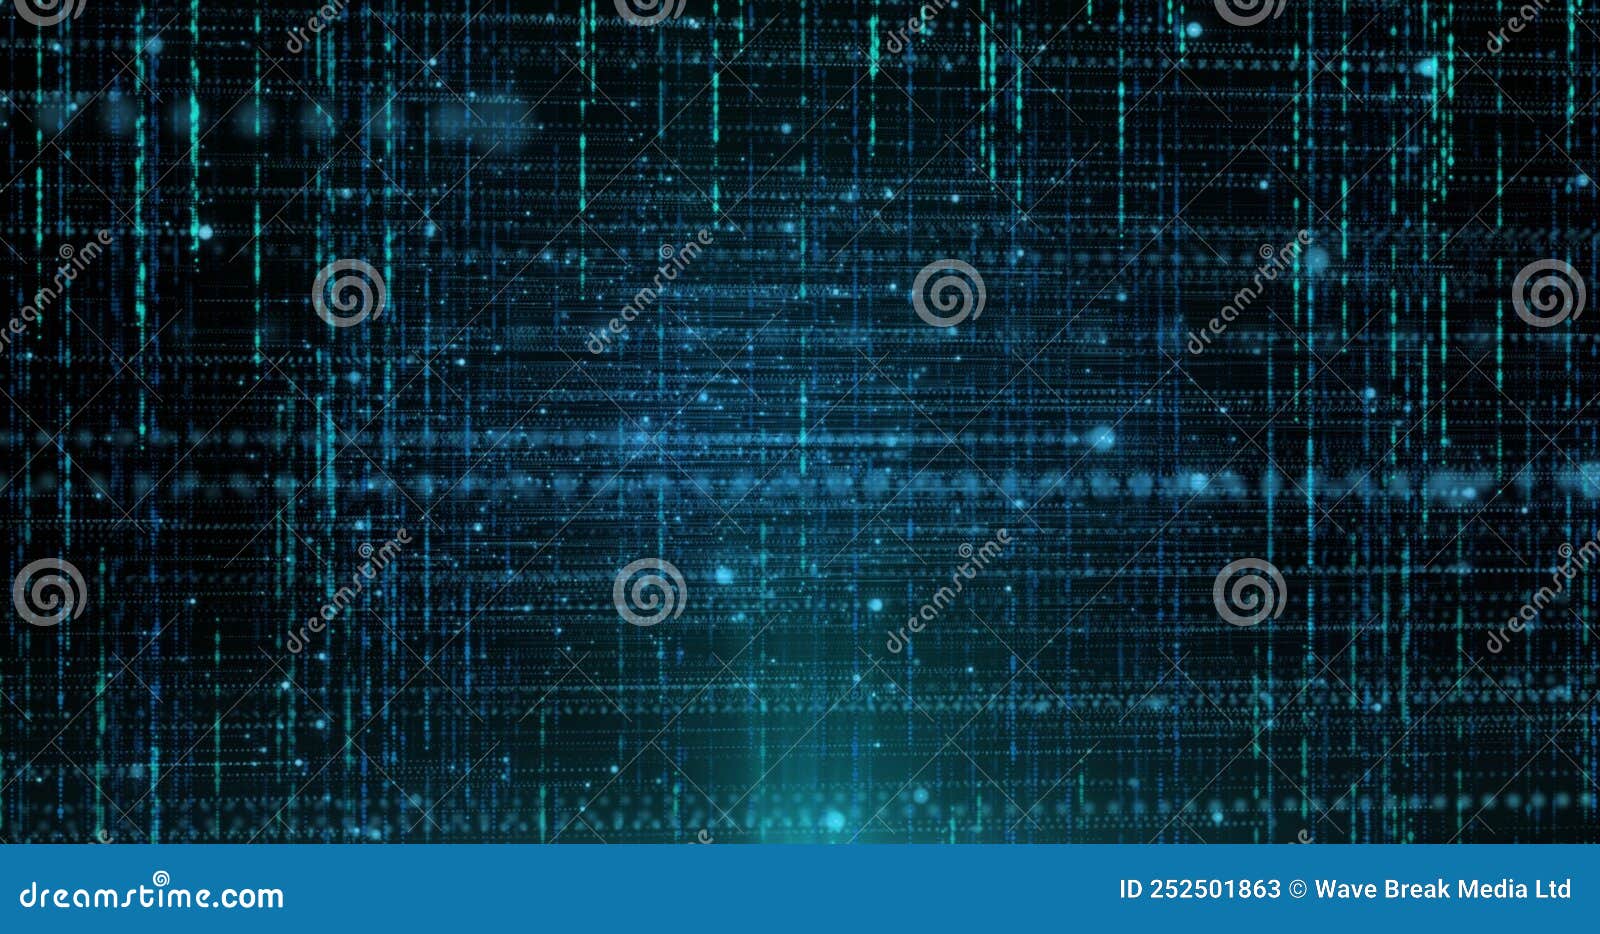 image of vertical lines over horizontal lines of glowing blue particles on black background